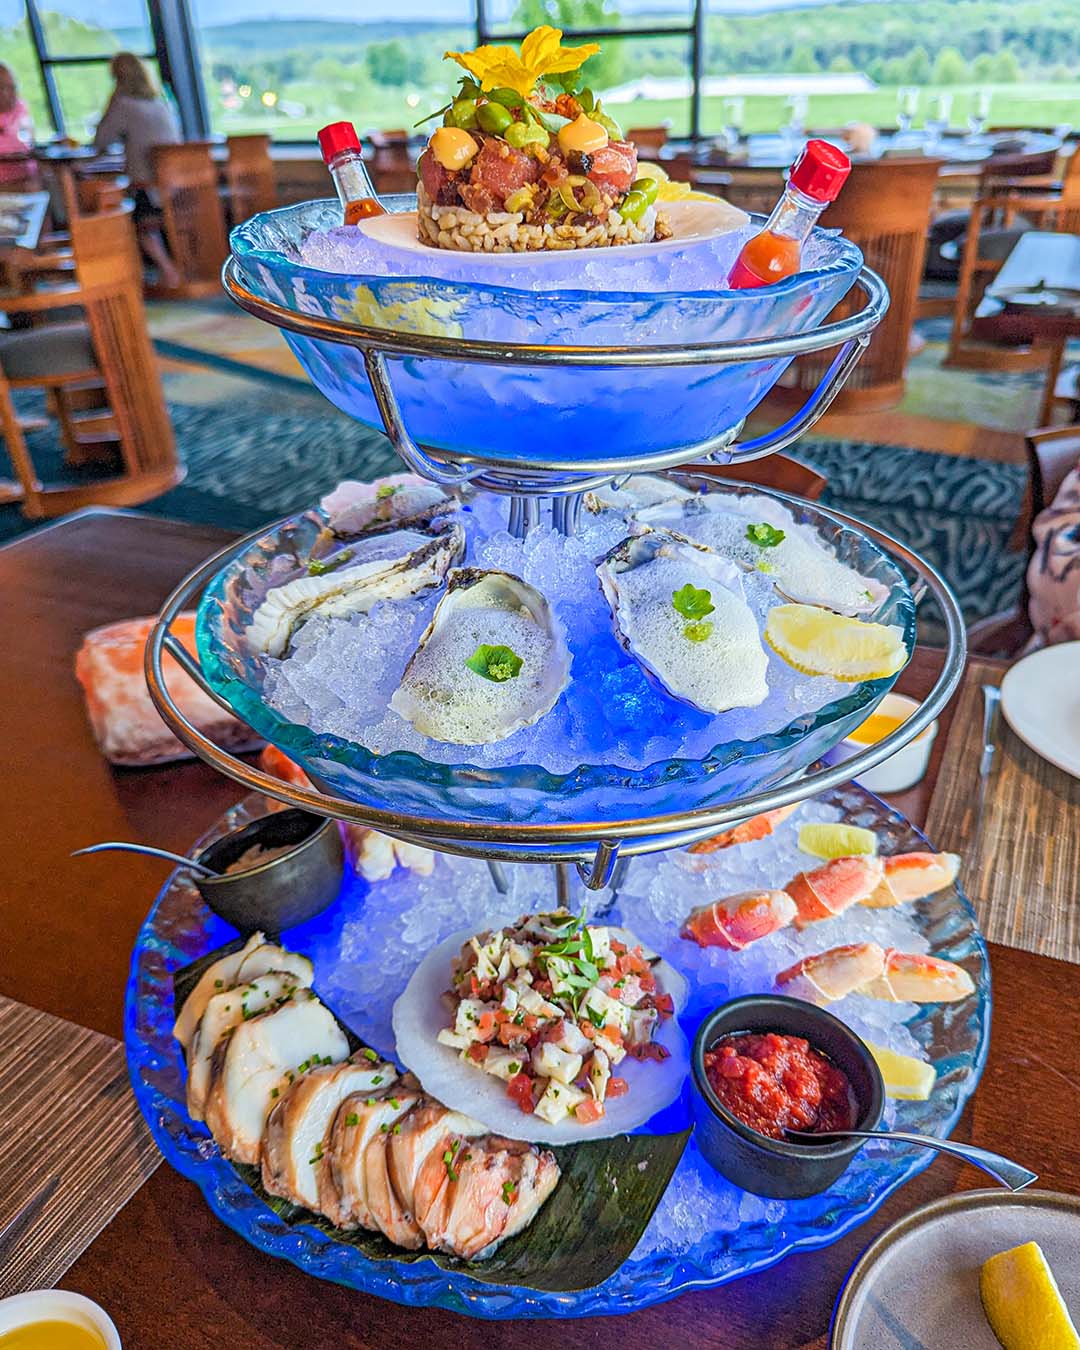 The stunning Seafood Tower at Aqueous. The levels of fresh seafood on beds of ice with led lights.